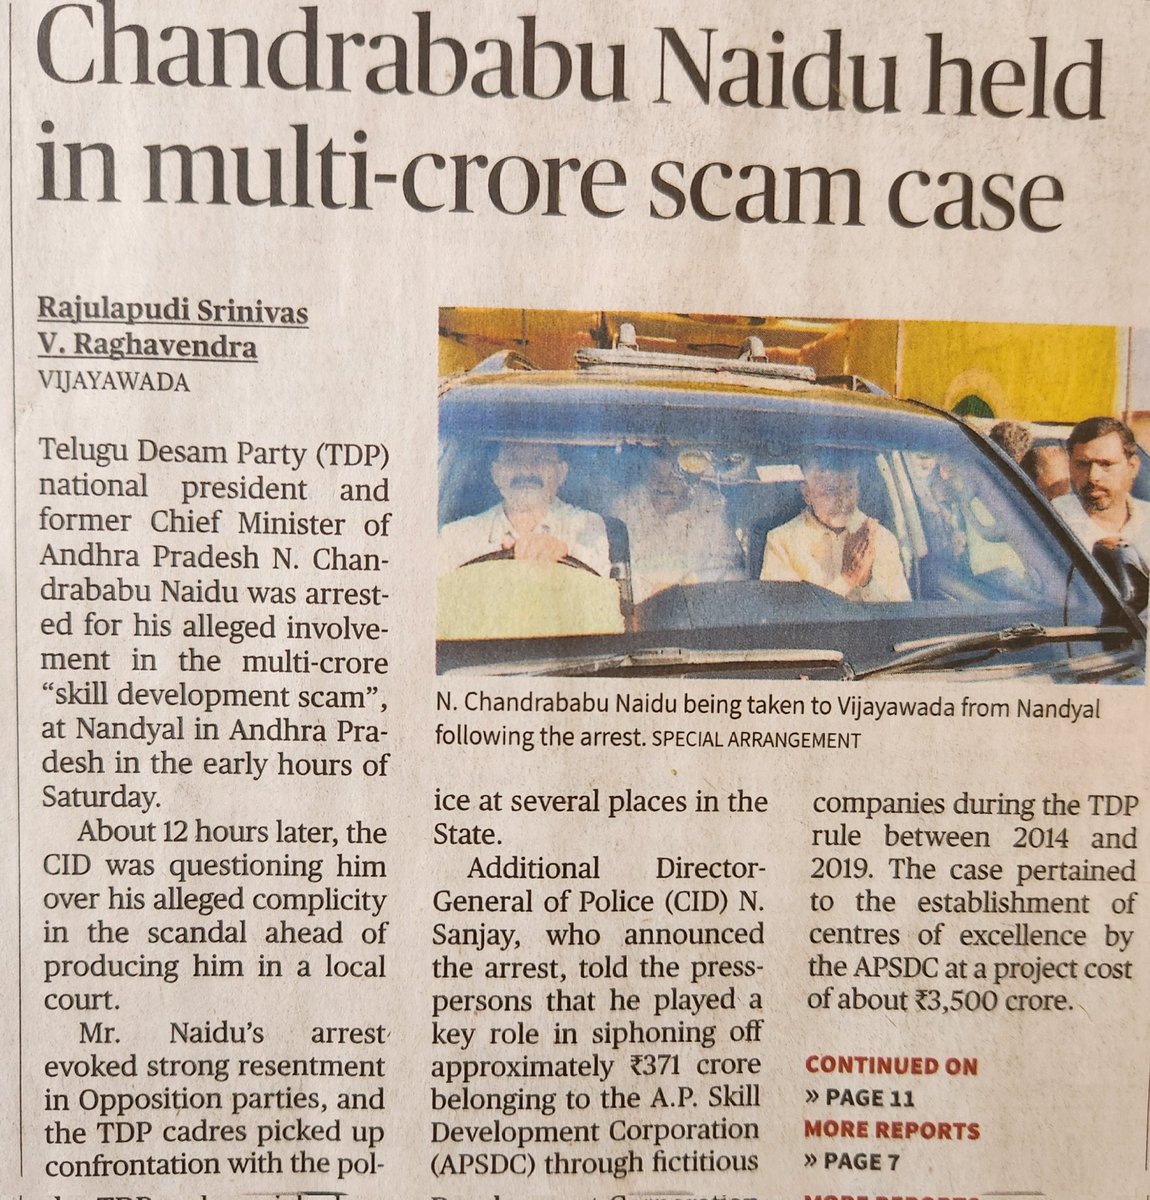 I was shocked to read that Shri Chandrababu Naidu-ji was arrested yesterday. I know him and he worked so hard to bring so many companies, including Zoho, to Andhra Pradesh. I hope justice prevails. 🙏